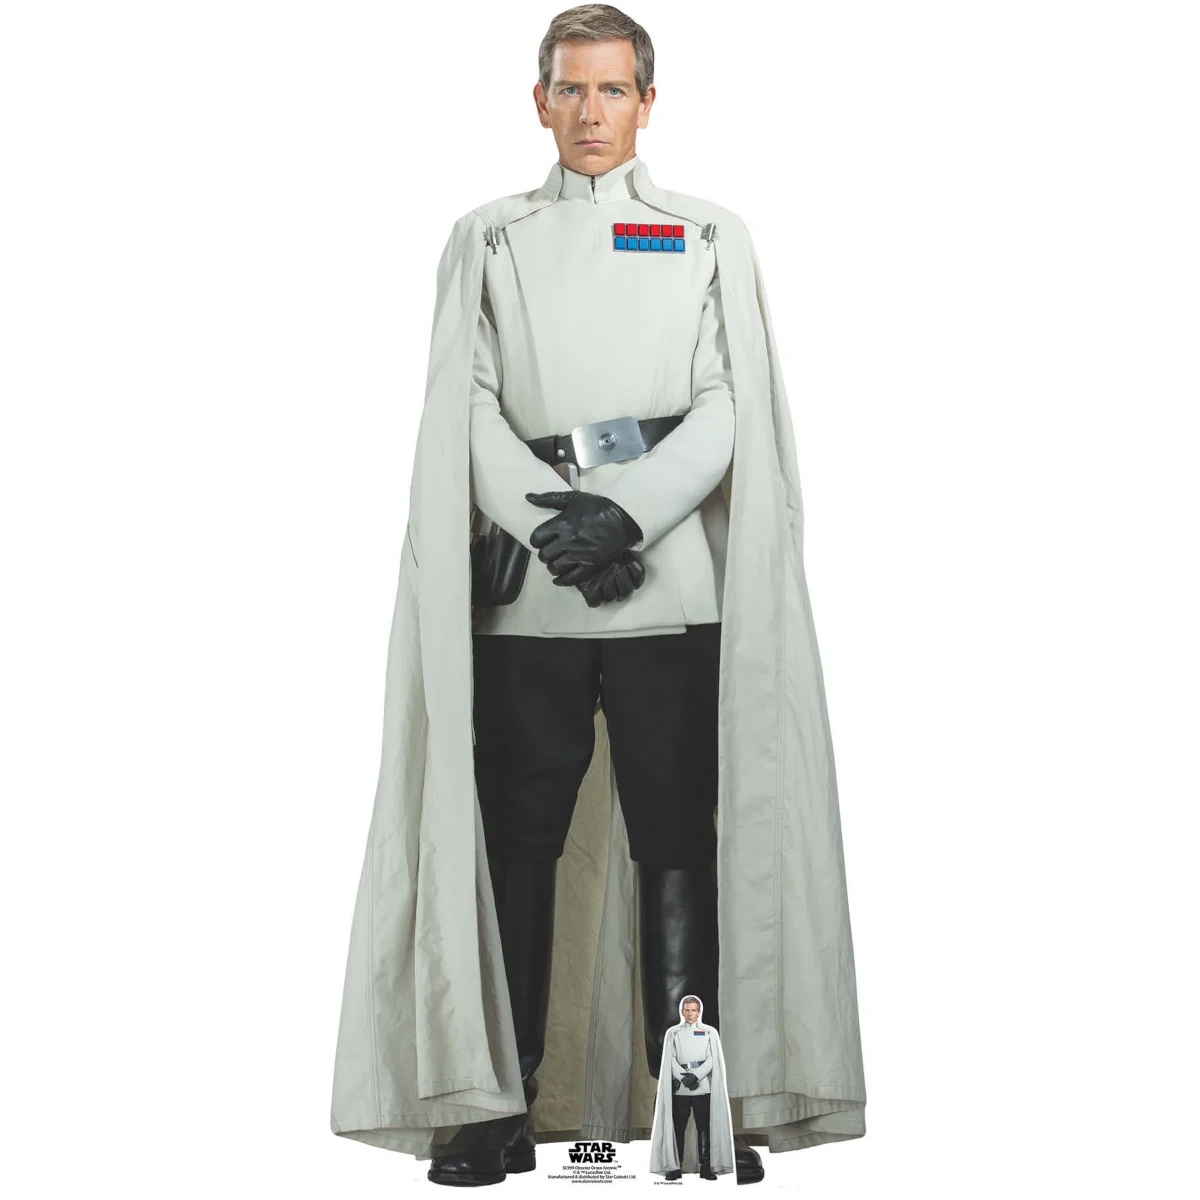 SC999 Director Orson Krennic (Rogue One A Star Wars Story) Official Lifesize + Mini Cardboard Cutout Standee Front